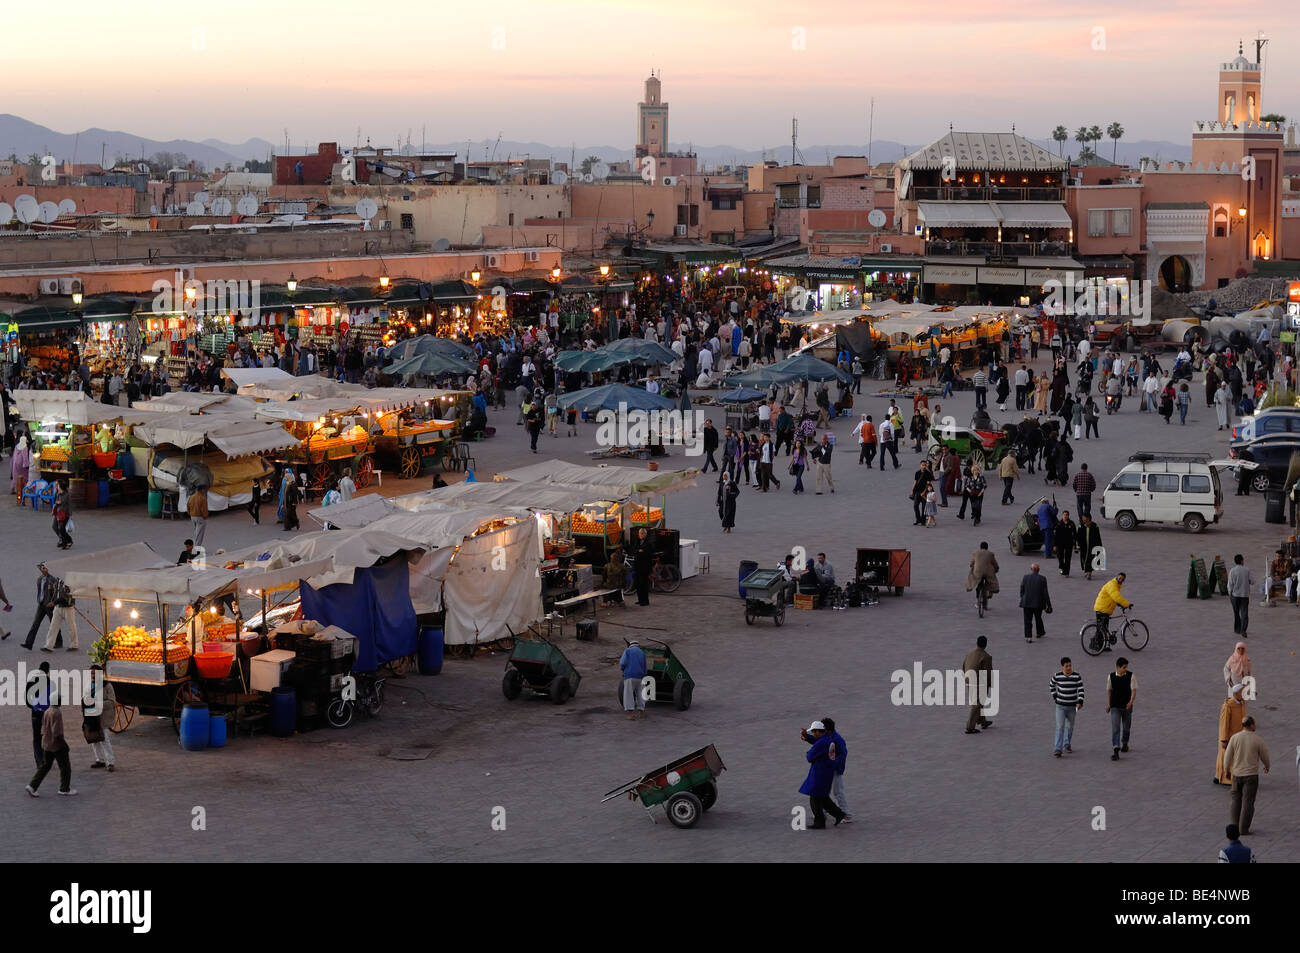 Evening Scene or Dusk at Djemaa El-Fna or Djemaa El Fna Square and View over the Rooftops of Marrakesh Morocco Stock Photo